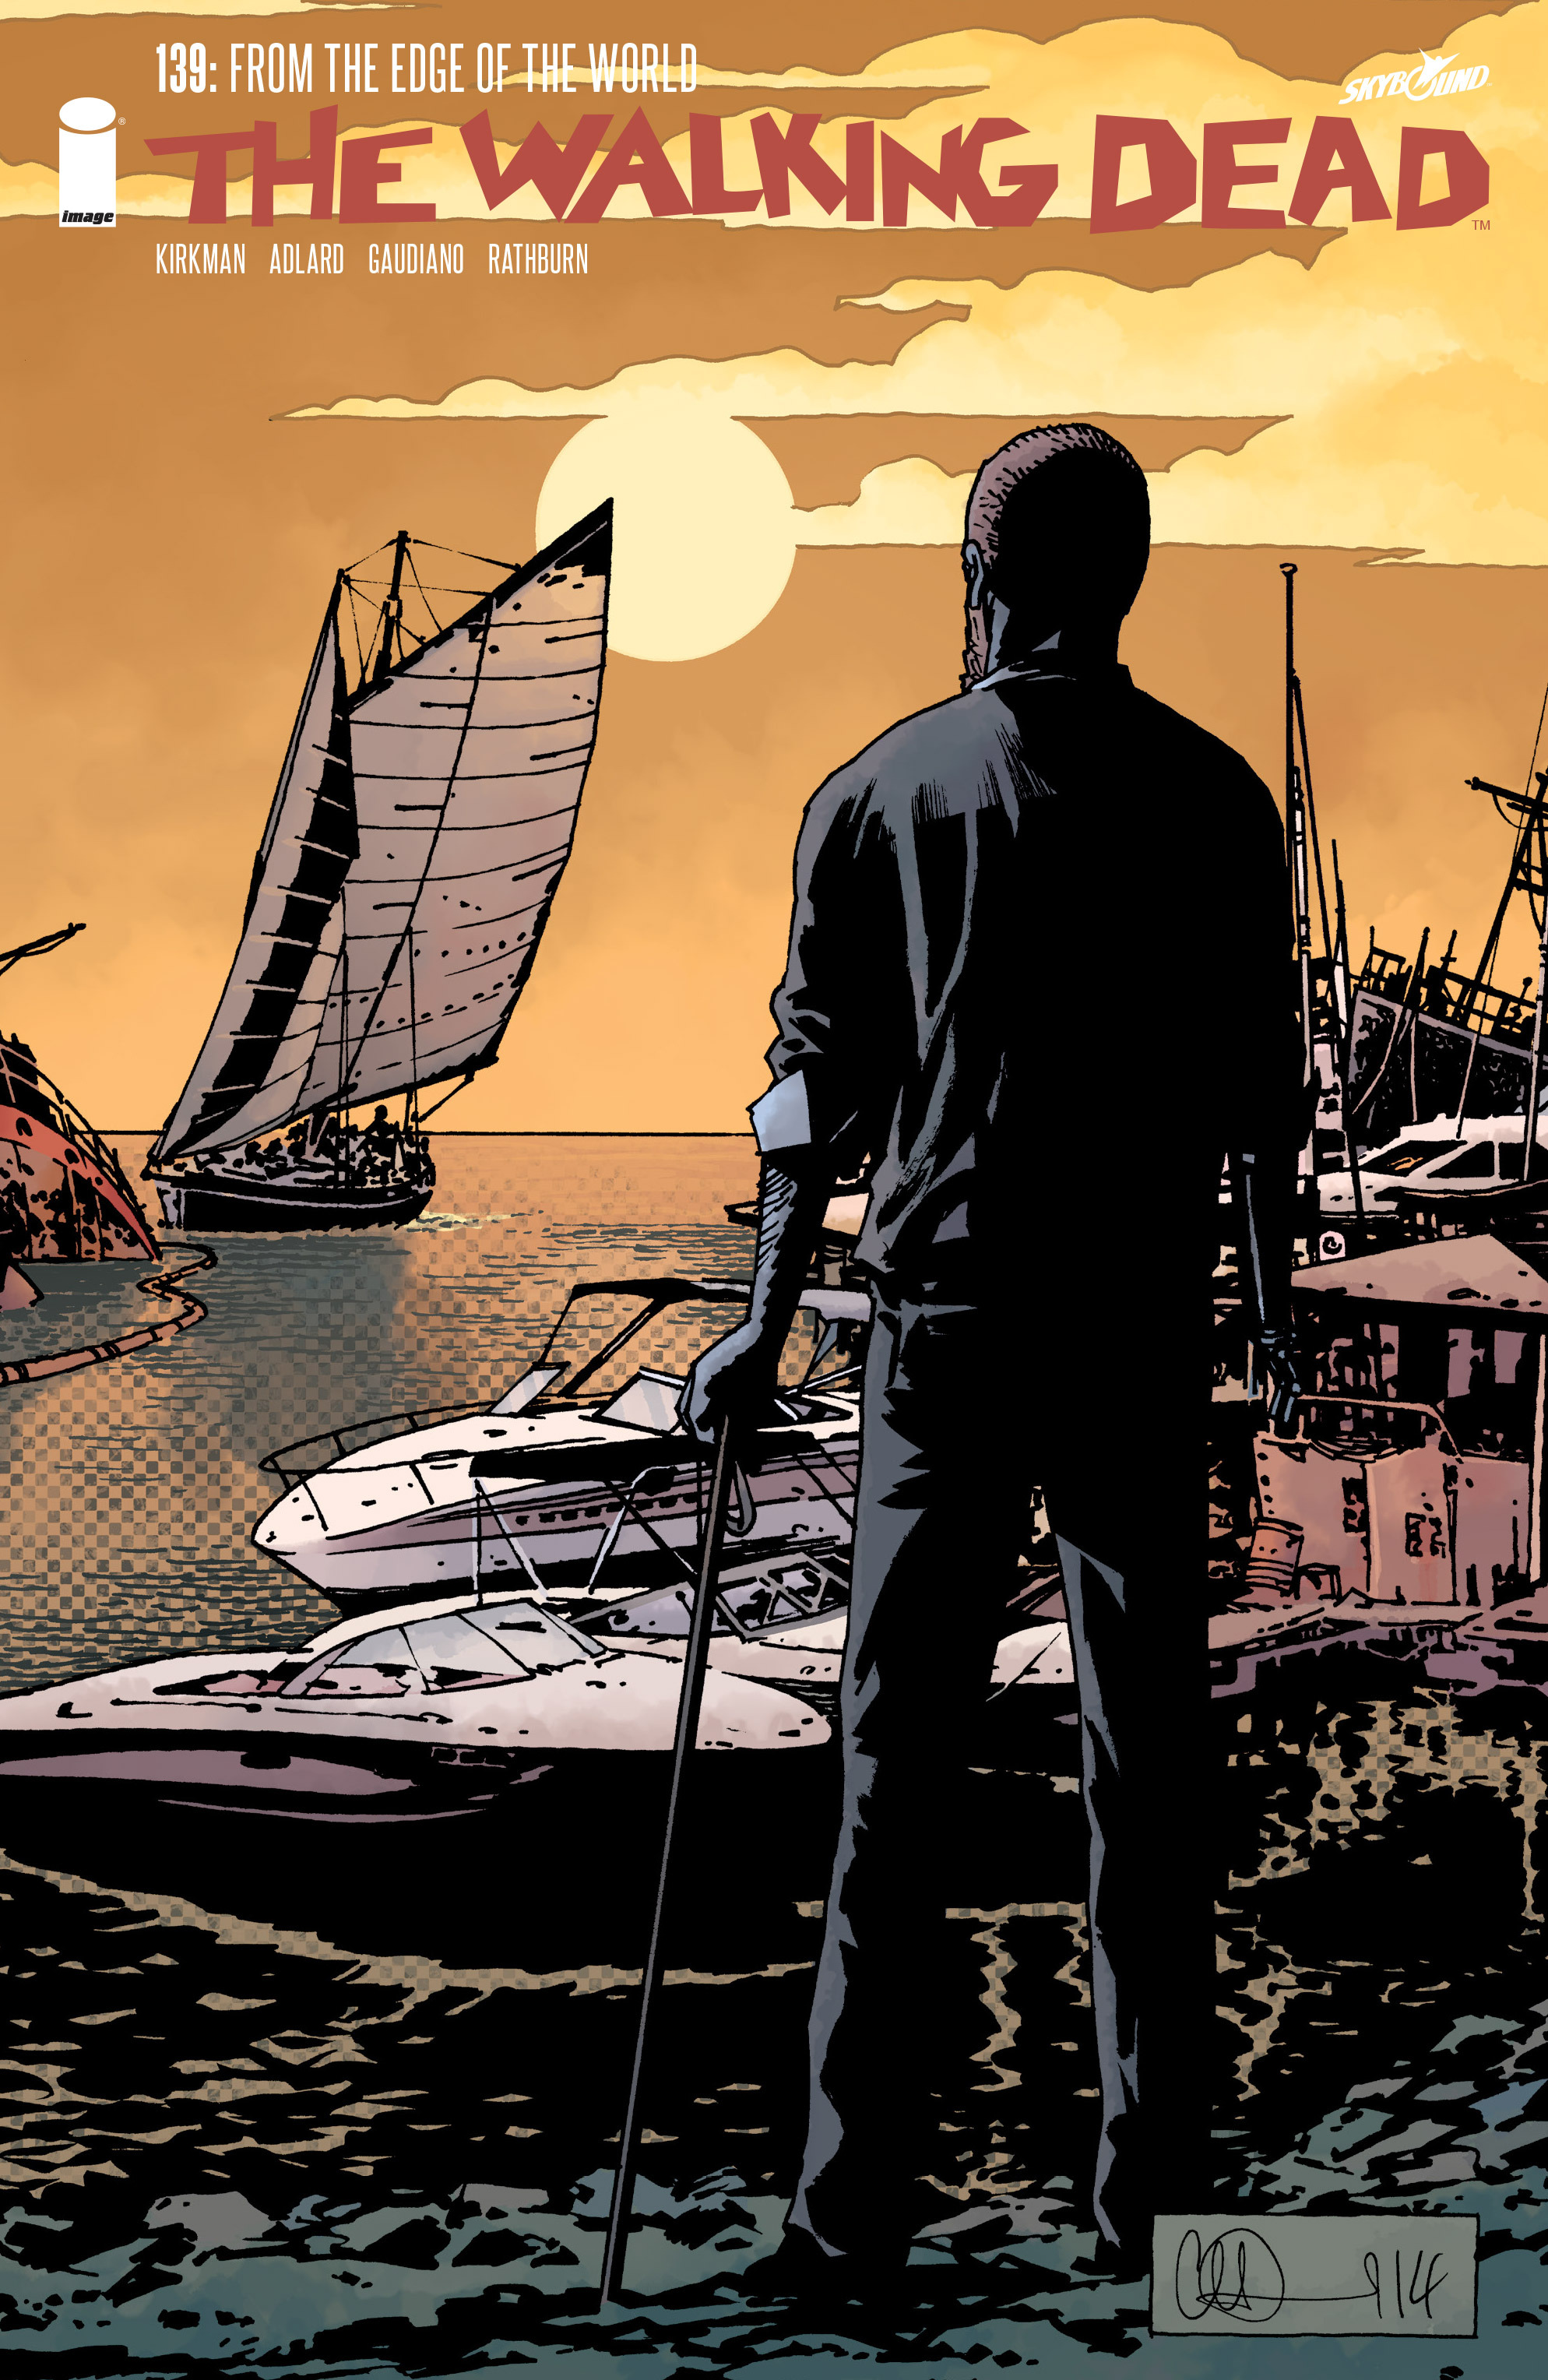 The Walking Dead 139 Page 1